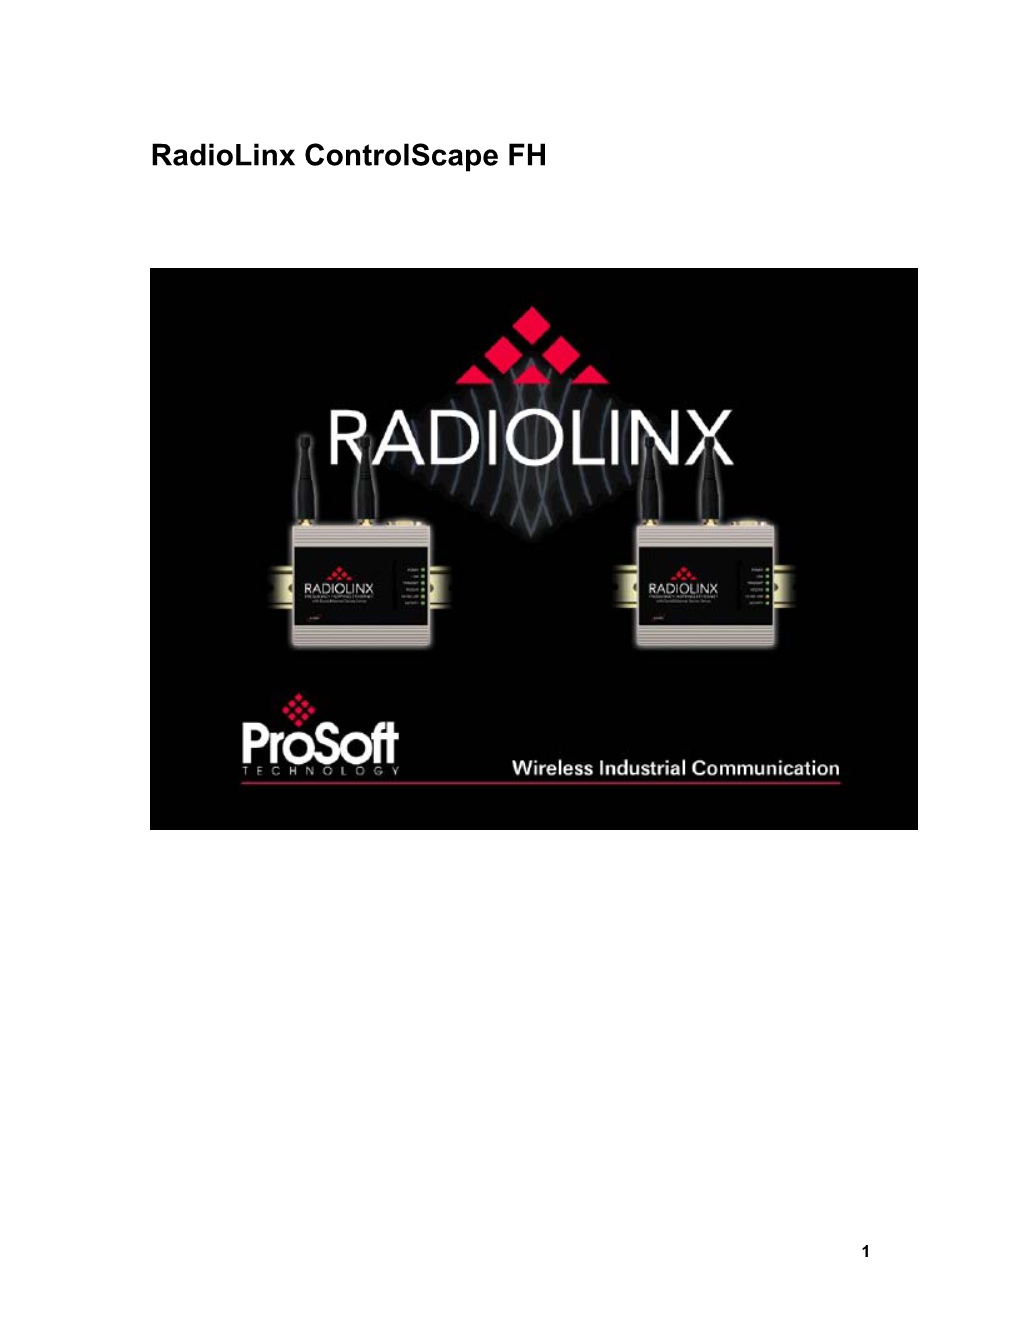 Radiolinx Radio Modems Provide a Wireless Replacement for Serial Or Ethernet Cables